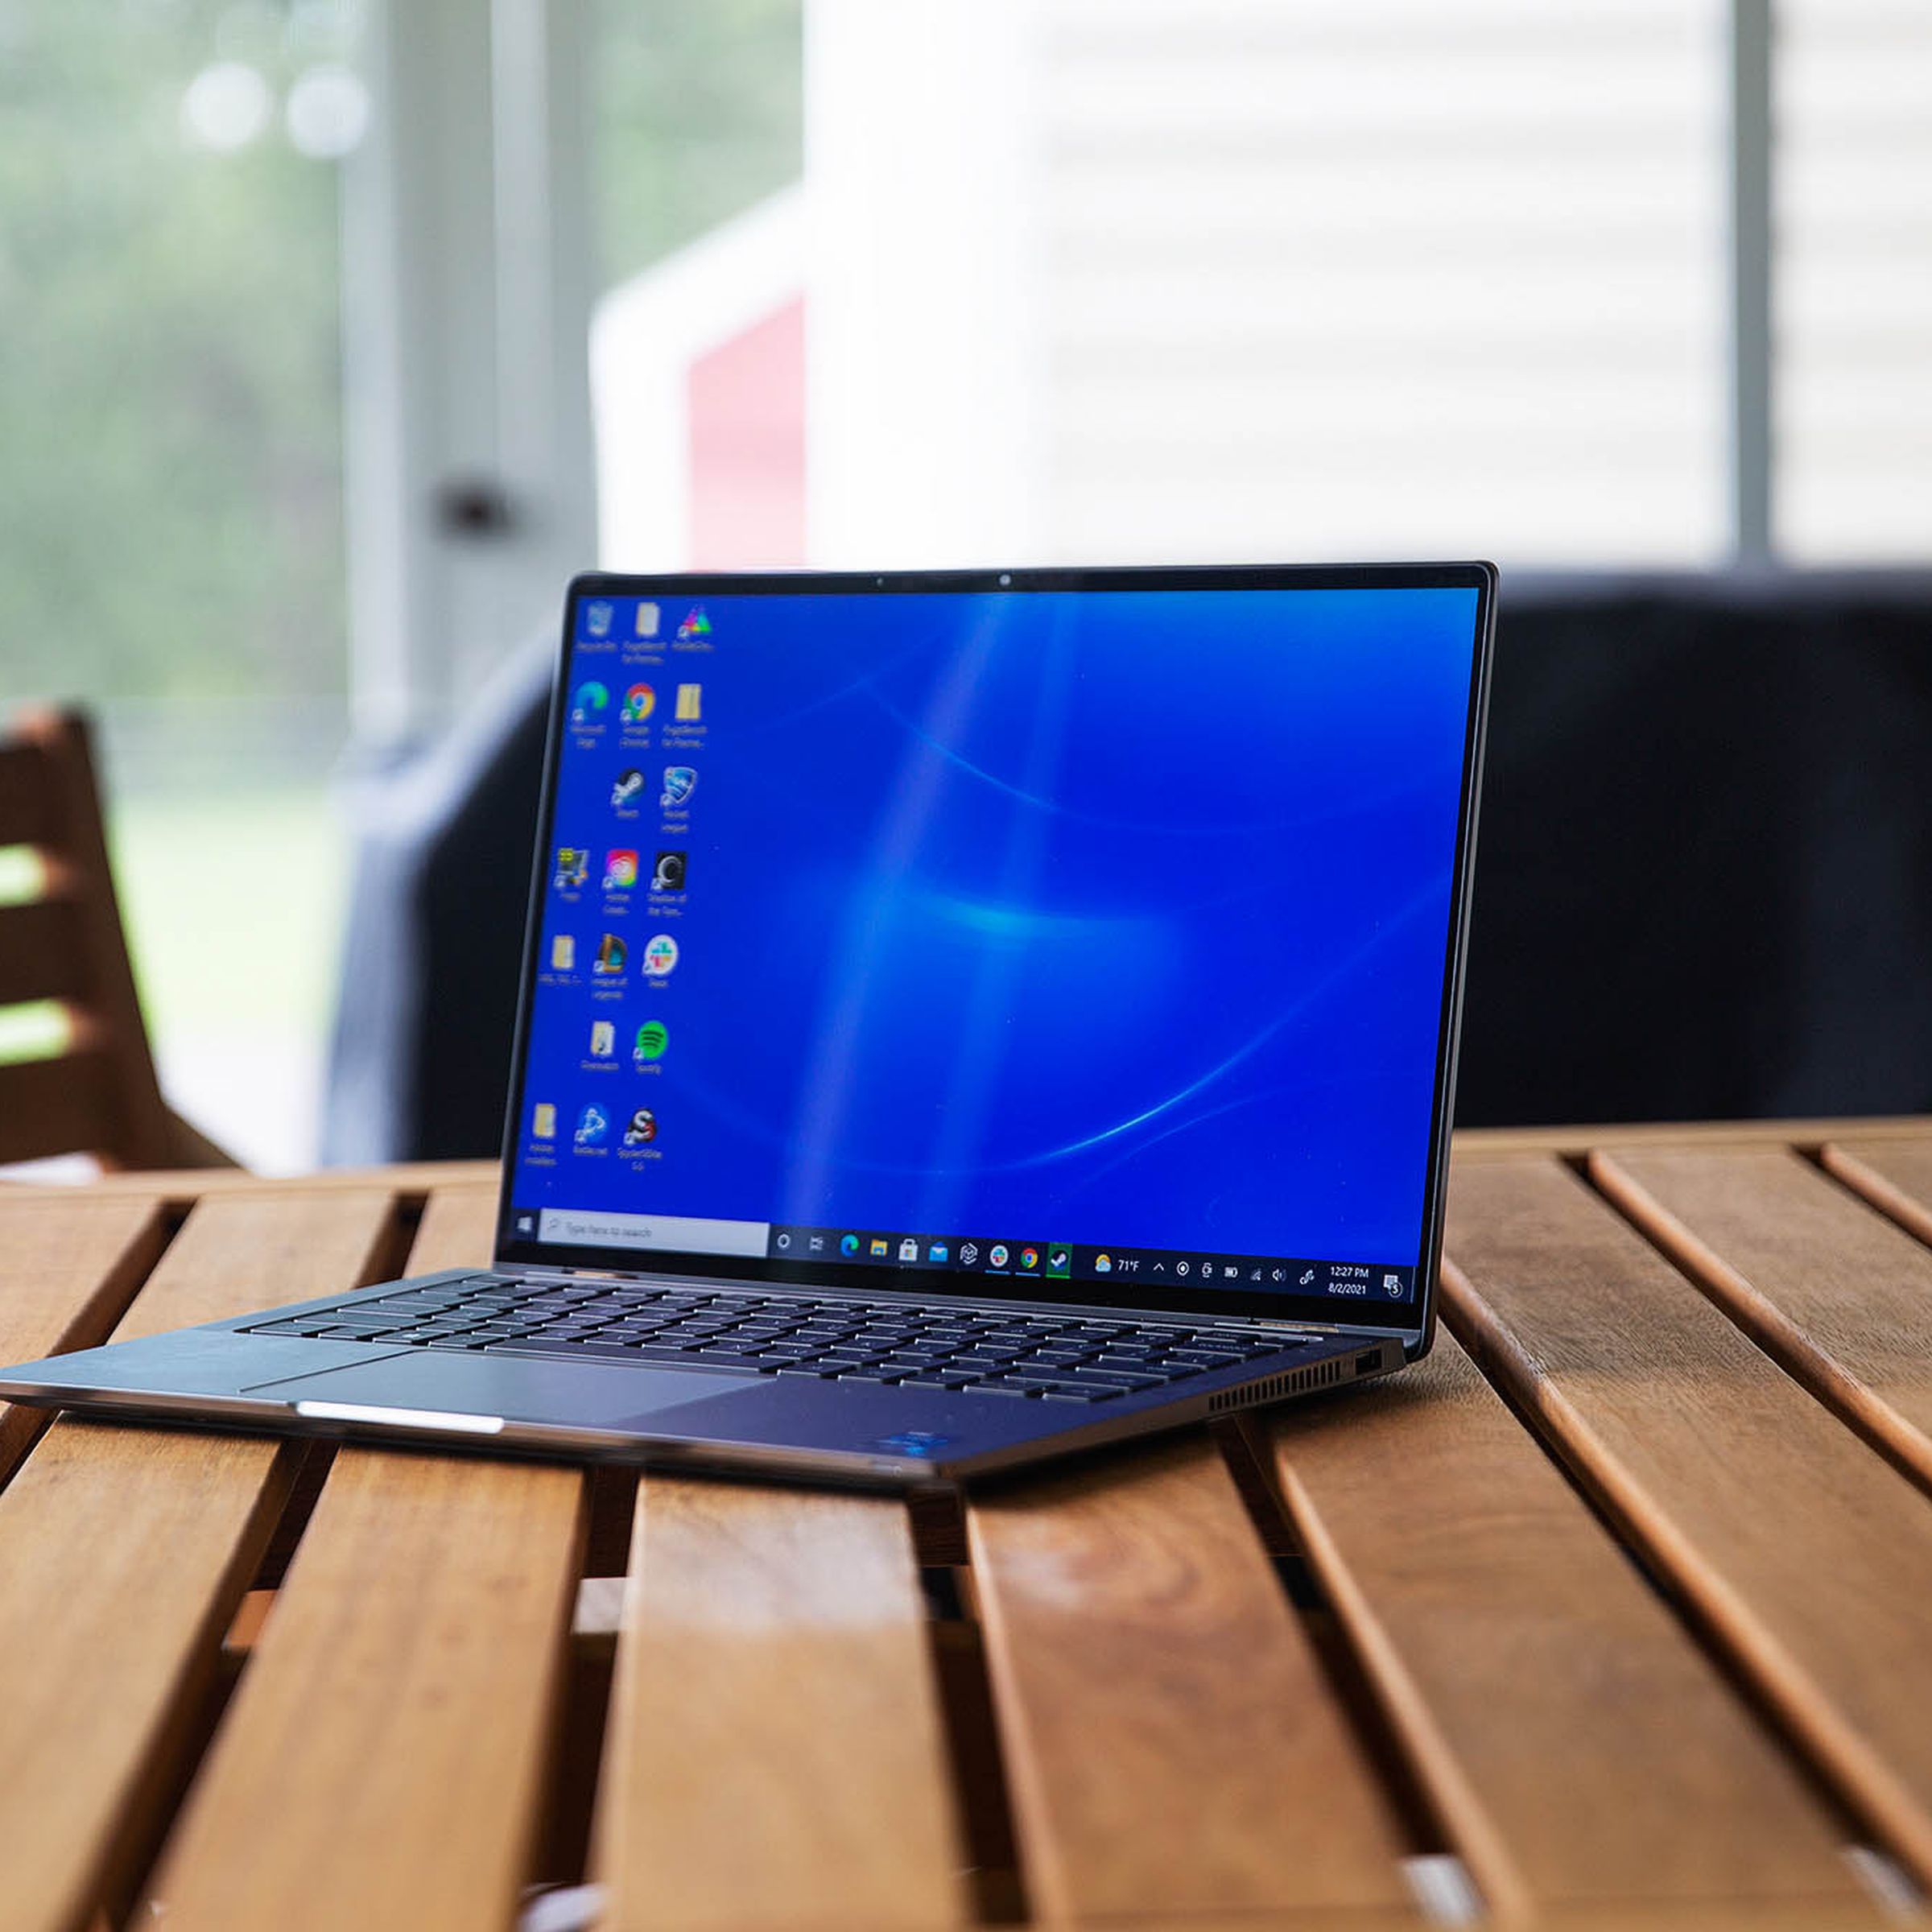 The Dell Latitude 9420 sits on a porch gable, facing to the left. The screen displays a desktop with a blue background.